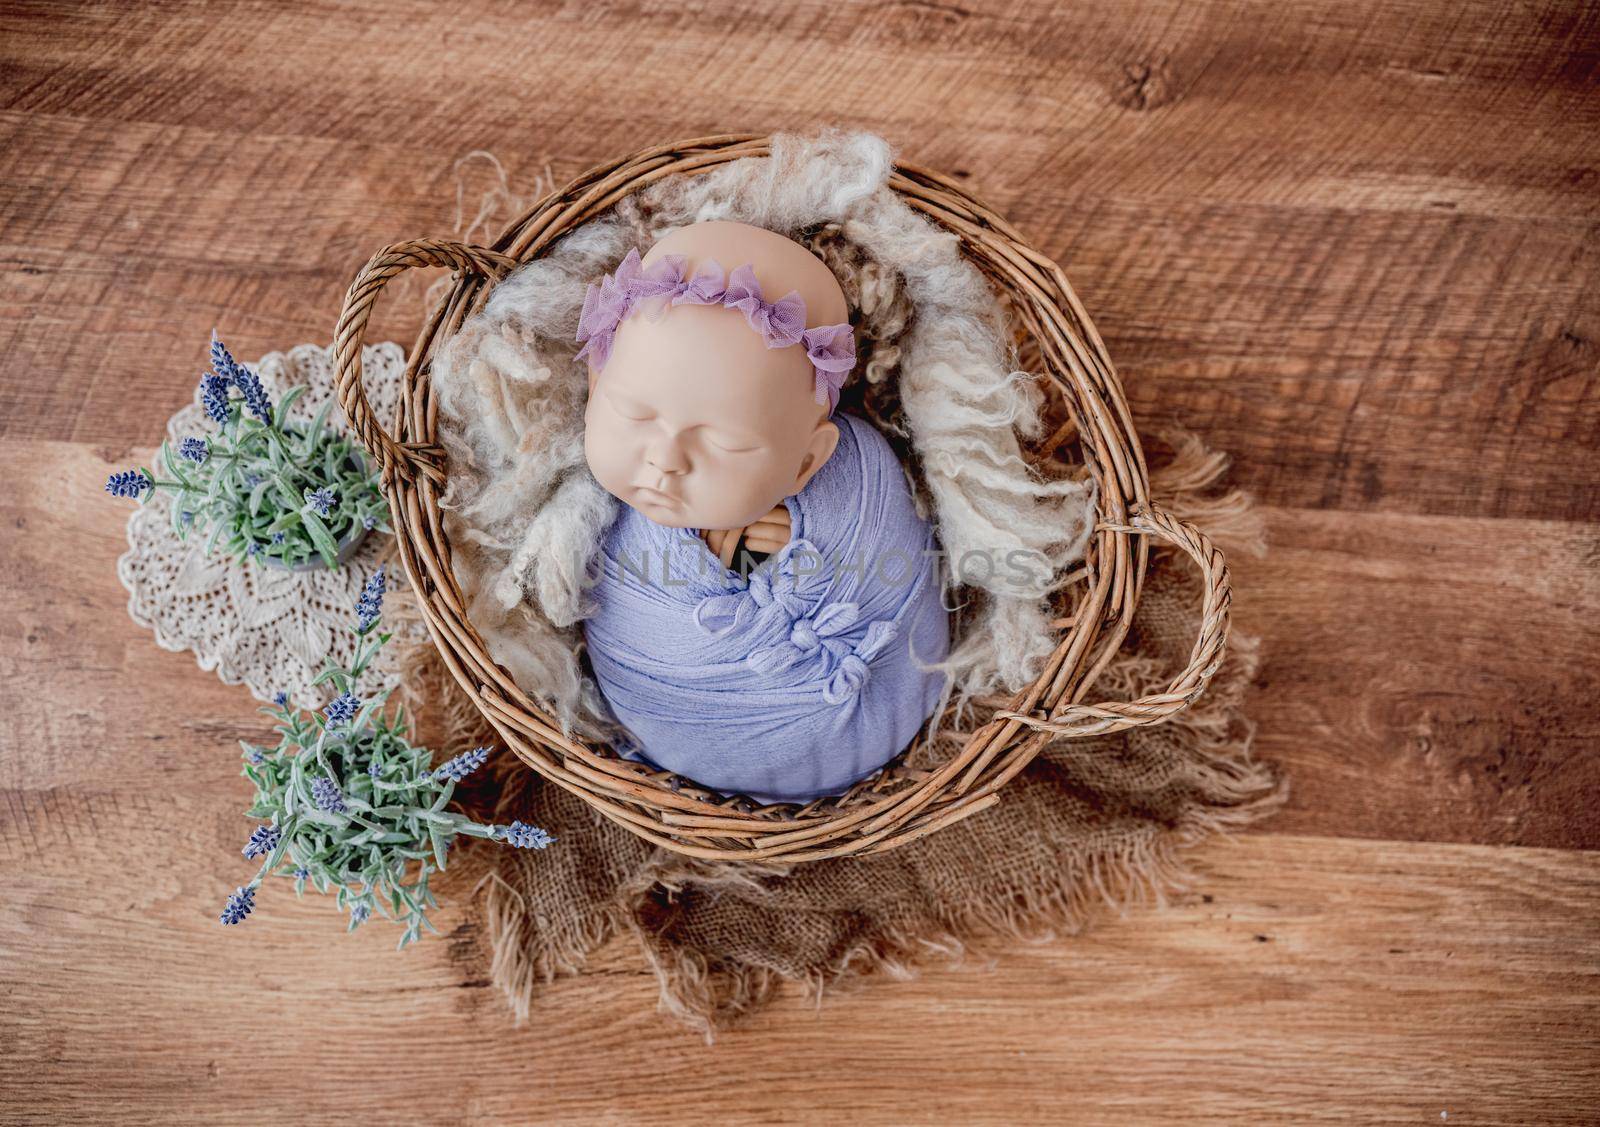 Beautiful background for newborn photosession with flowers and swaddled infant manequen for photographer trainings. Digital composite with baby doll model